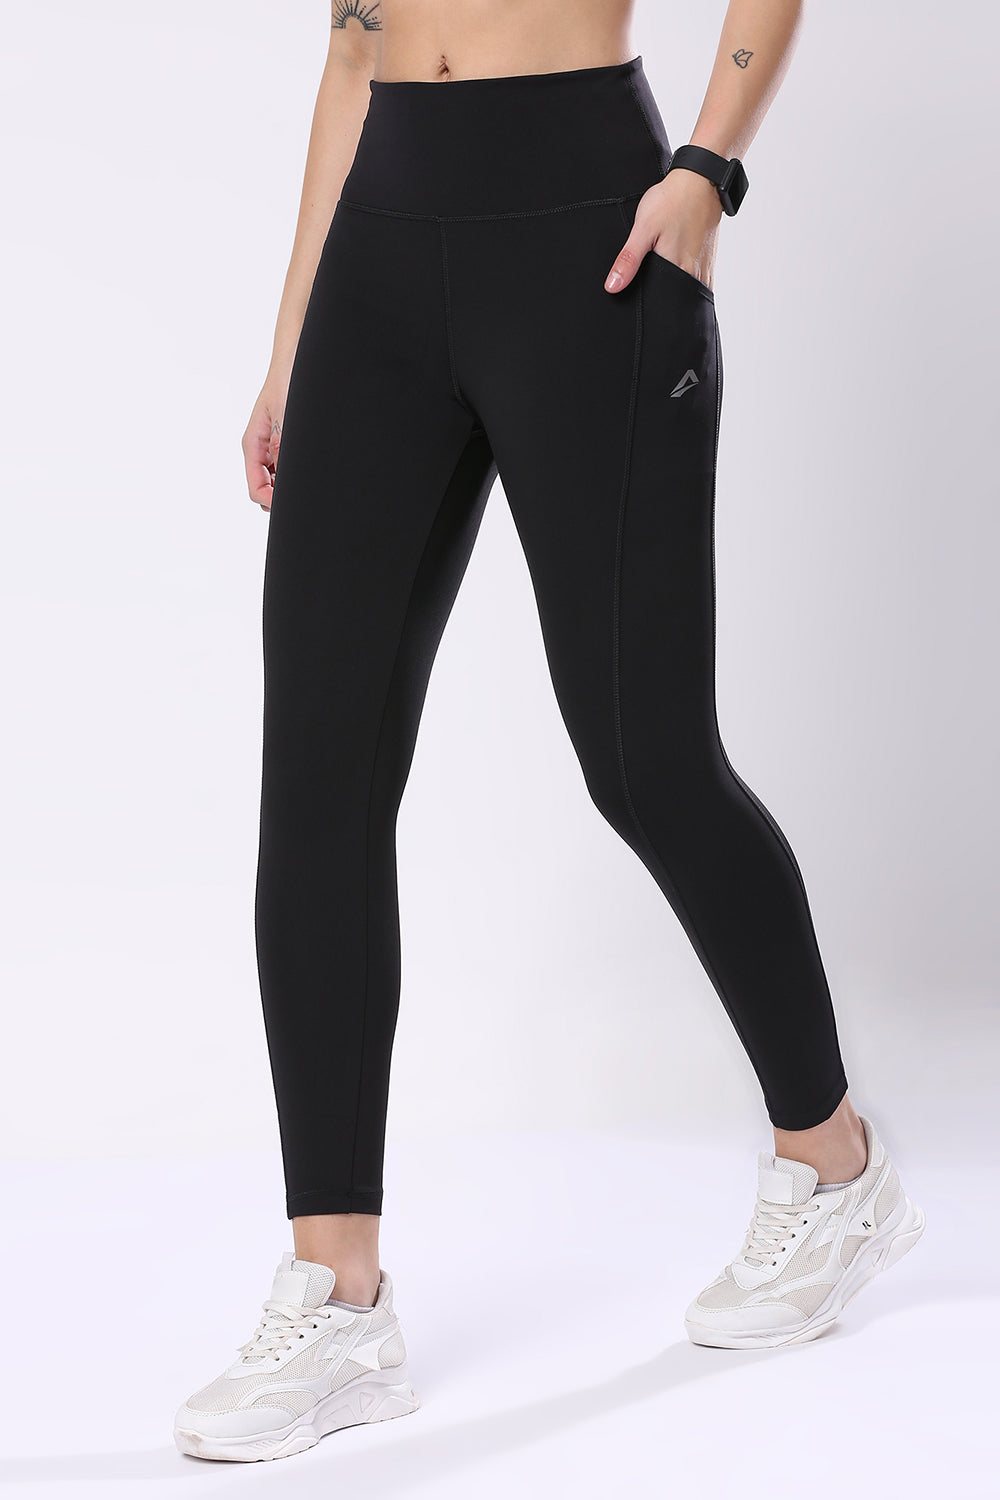 Girls Net Sports Tights at Rs 195, Ladies Tights in Jaipur